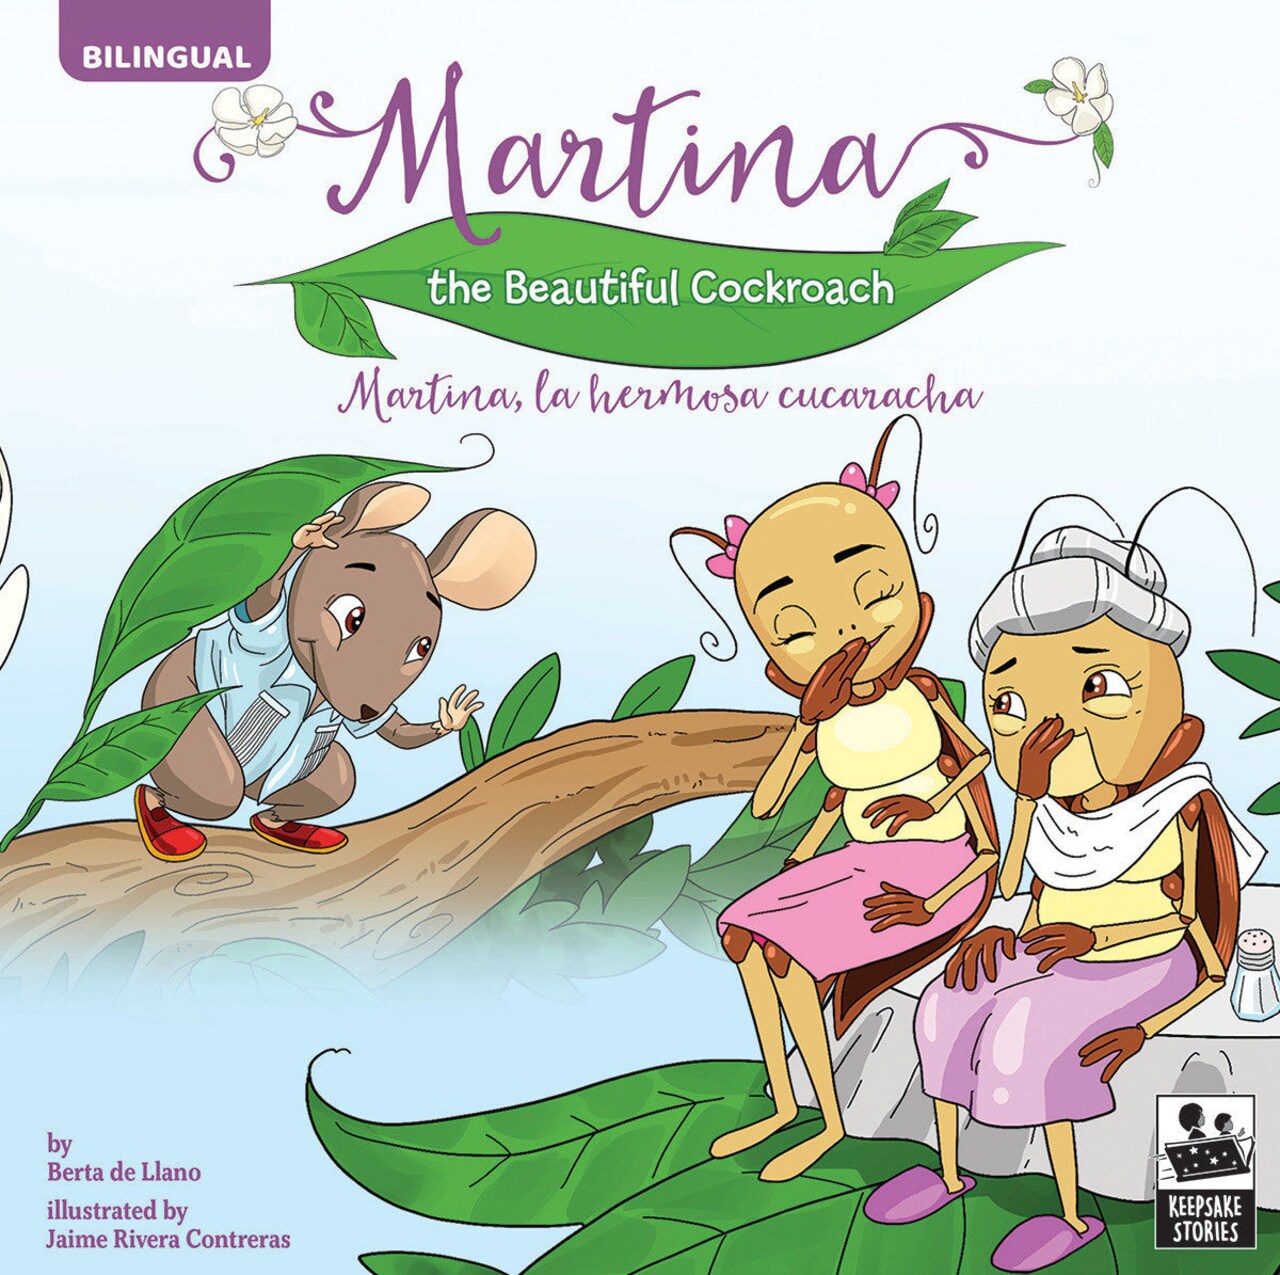 Rourke Educational Media Martina The Beautiful Cockroach&#x2014;Bilingual Children&#x2019;s Storybook About Finding Love, PreK-Grade 3 Leveled Readers, Keepsake Stories (32 Pages)